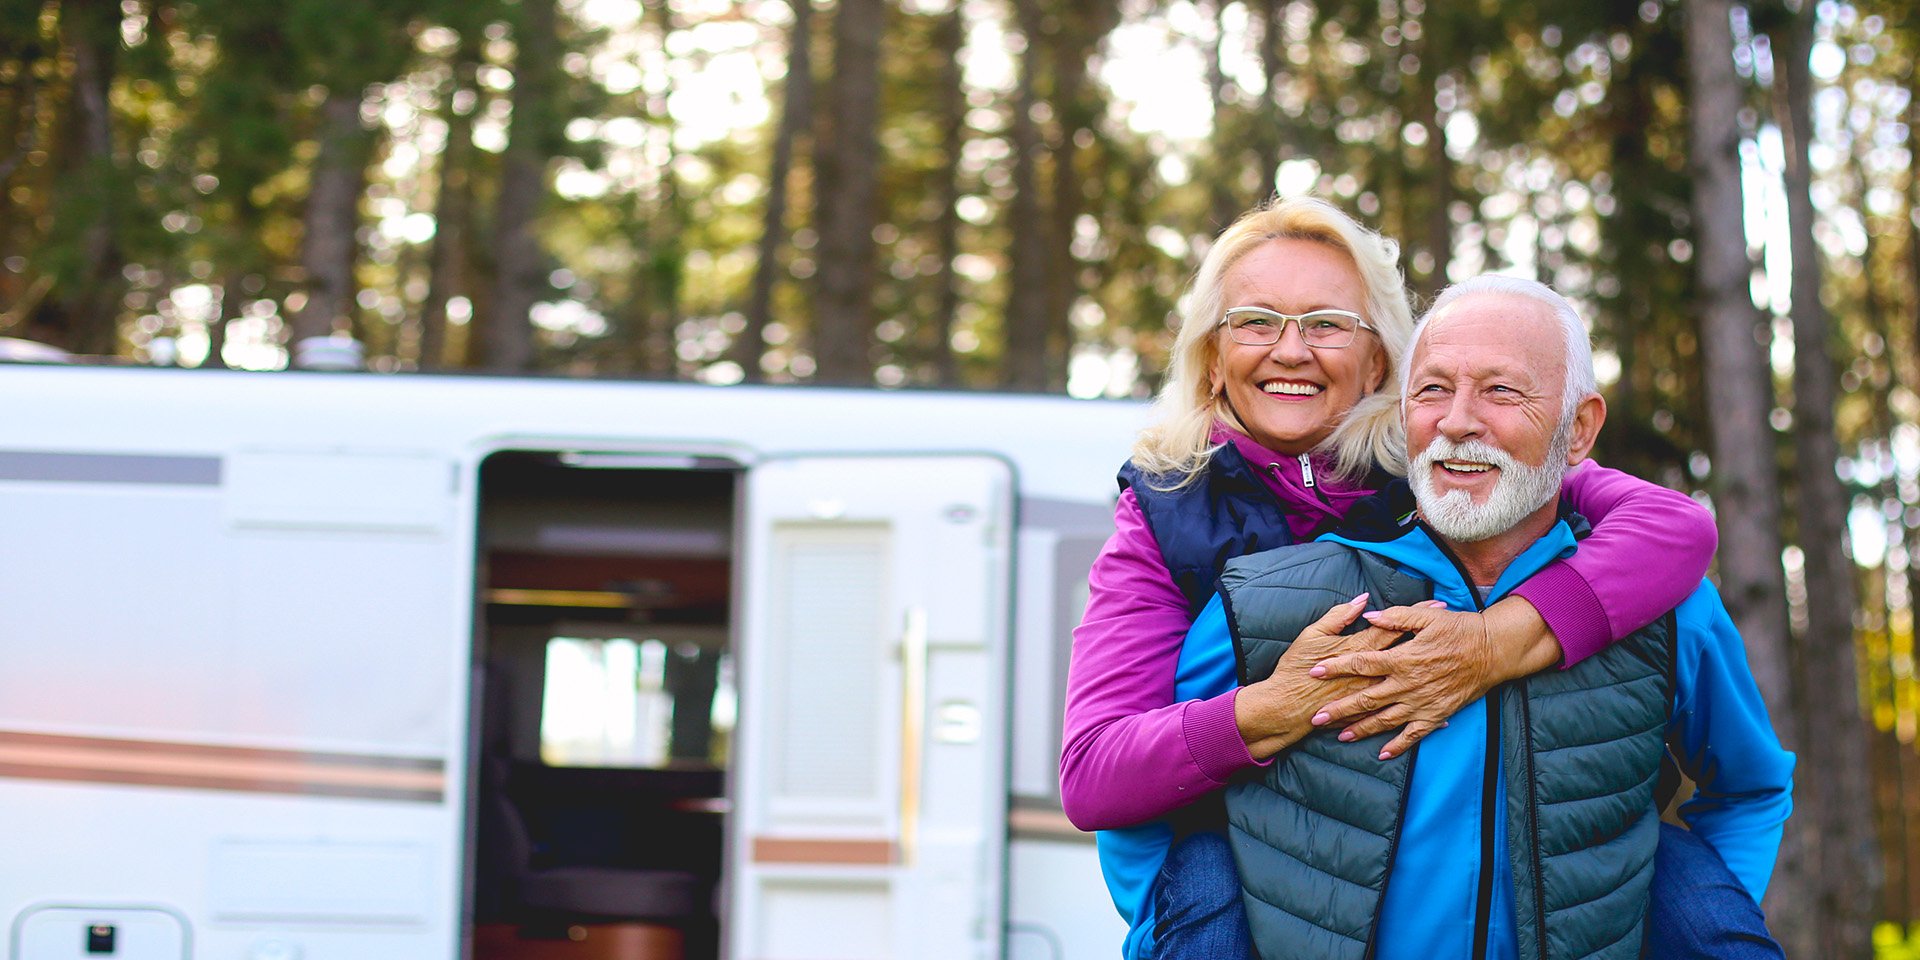 Elderly pair finds joy camping in the woods. The woman rides on the man's back, both smiling, with their RV in the background.